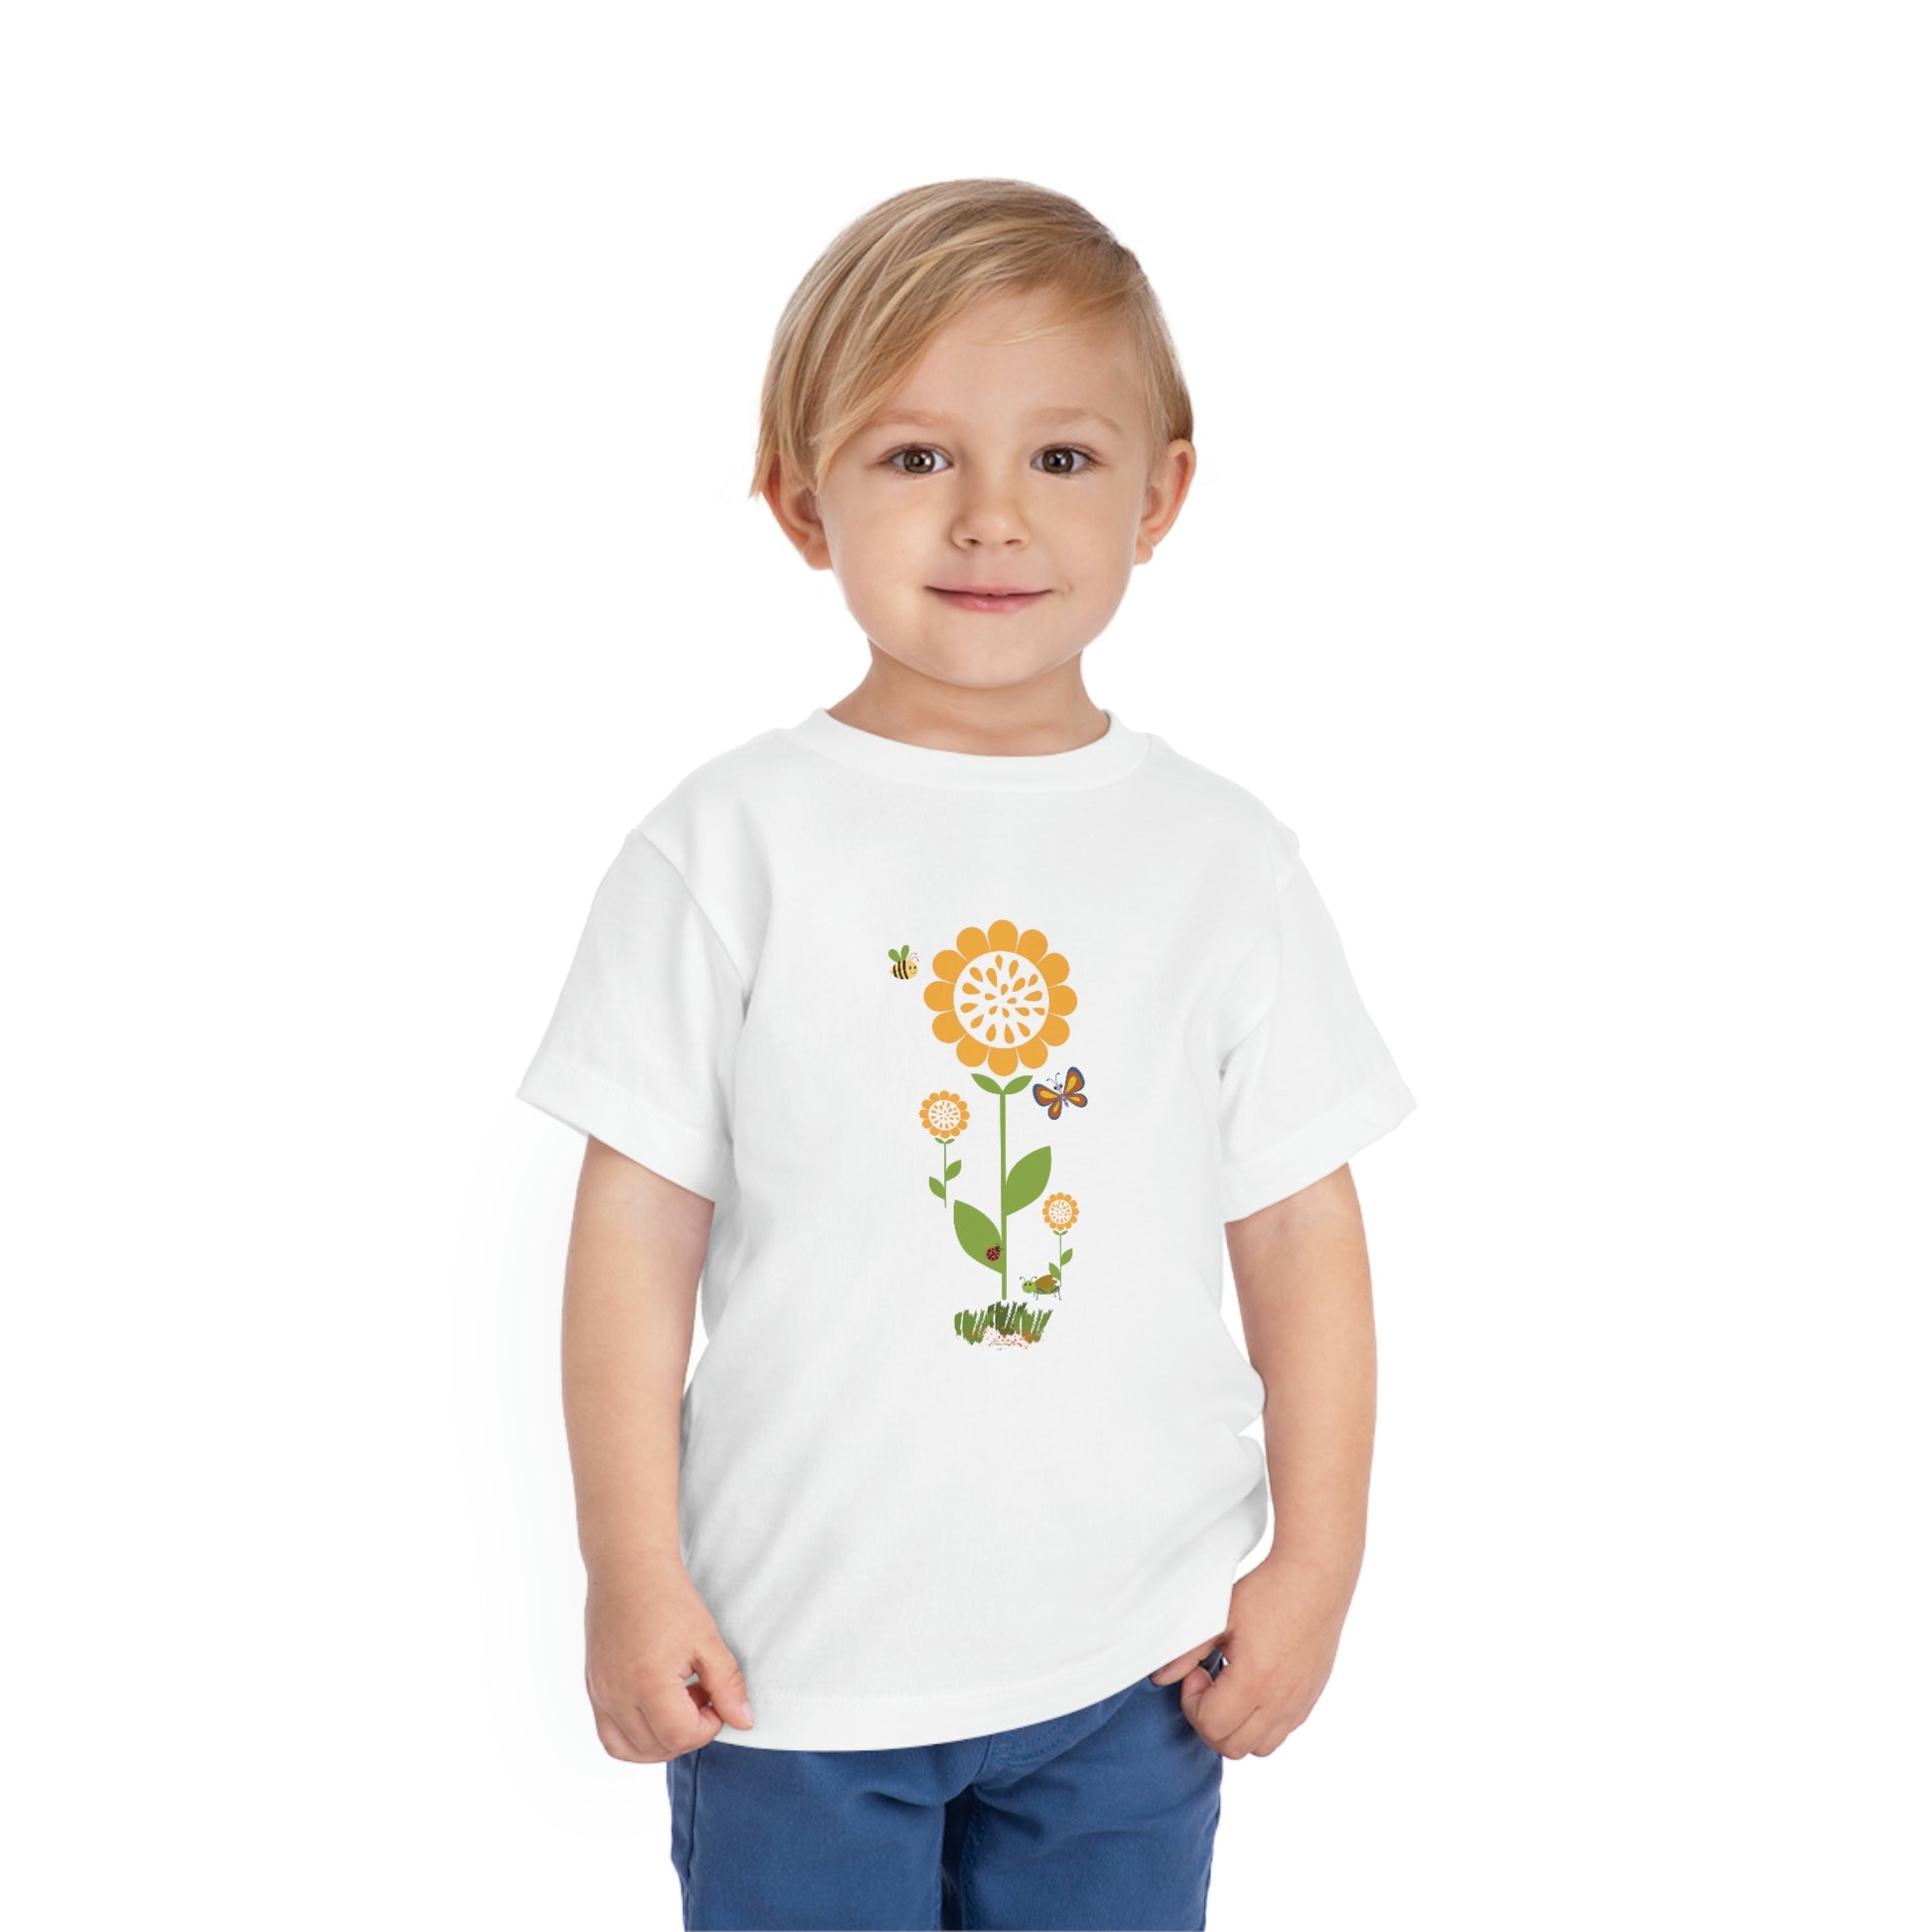 Mock up of child wearing our White t-shirt